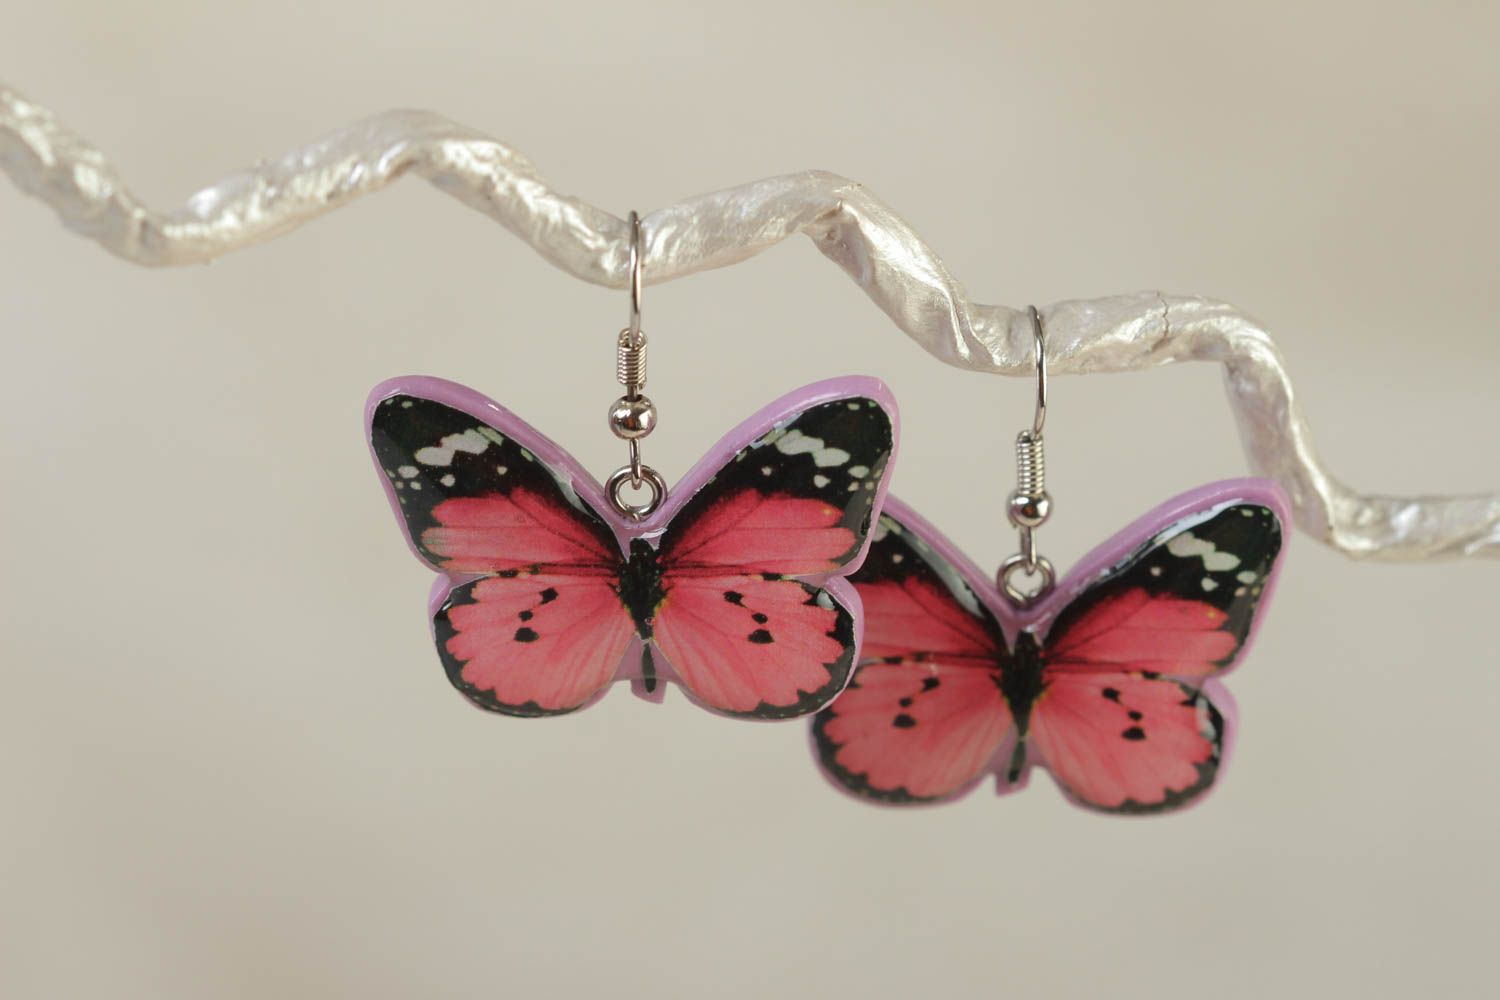 A set of handcrafted vintage earrings made of polymer clay and glass glaze with butterflies photo 1